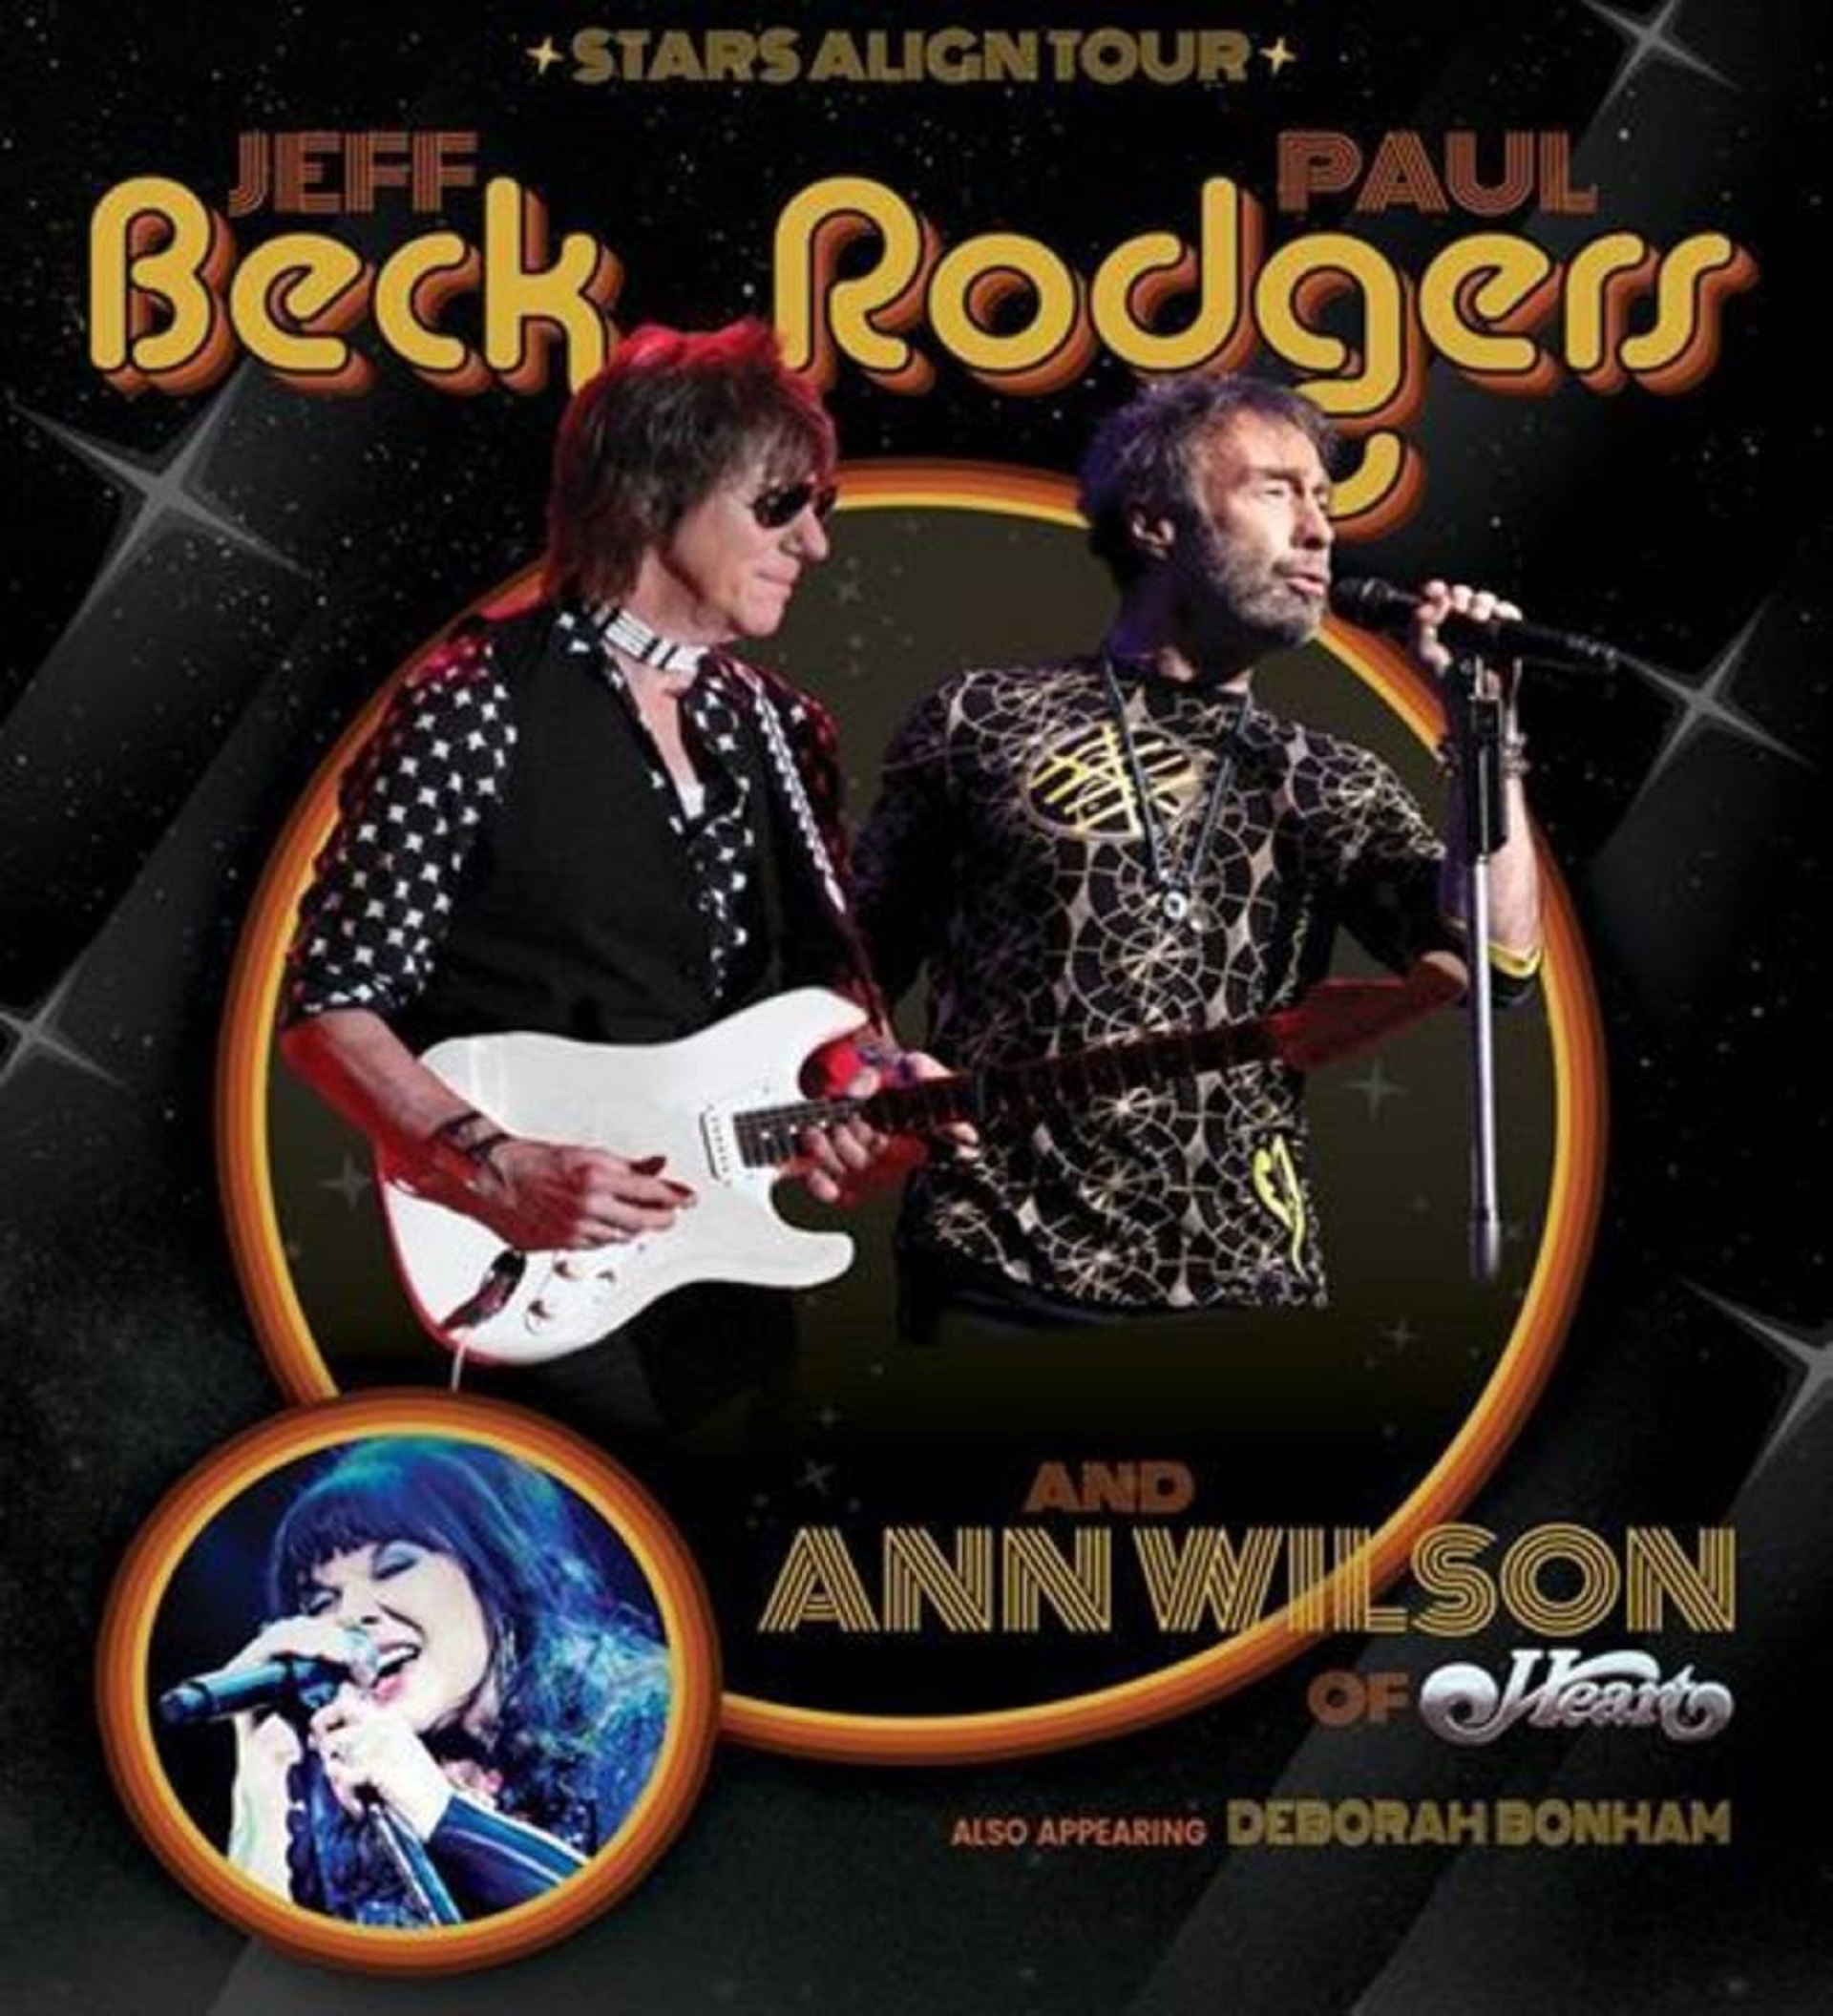 Stars Align Tour Begins With Paul Rodgers and Jeff Beck